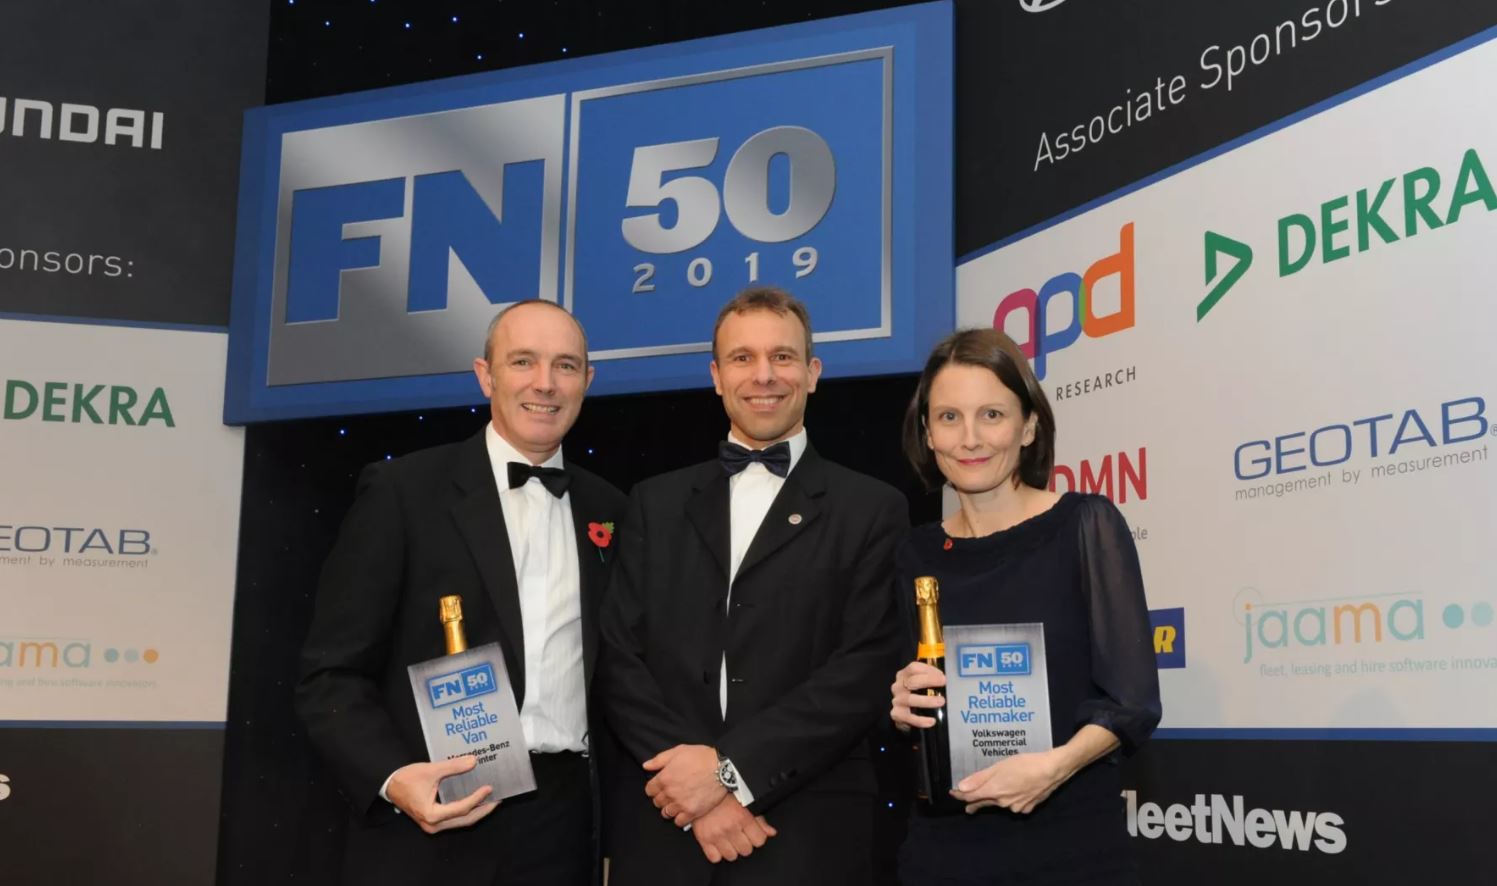 Volkswagen Commercial Vehicles Named Most Reliable Vanmaker At FN50 Awards